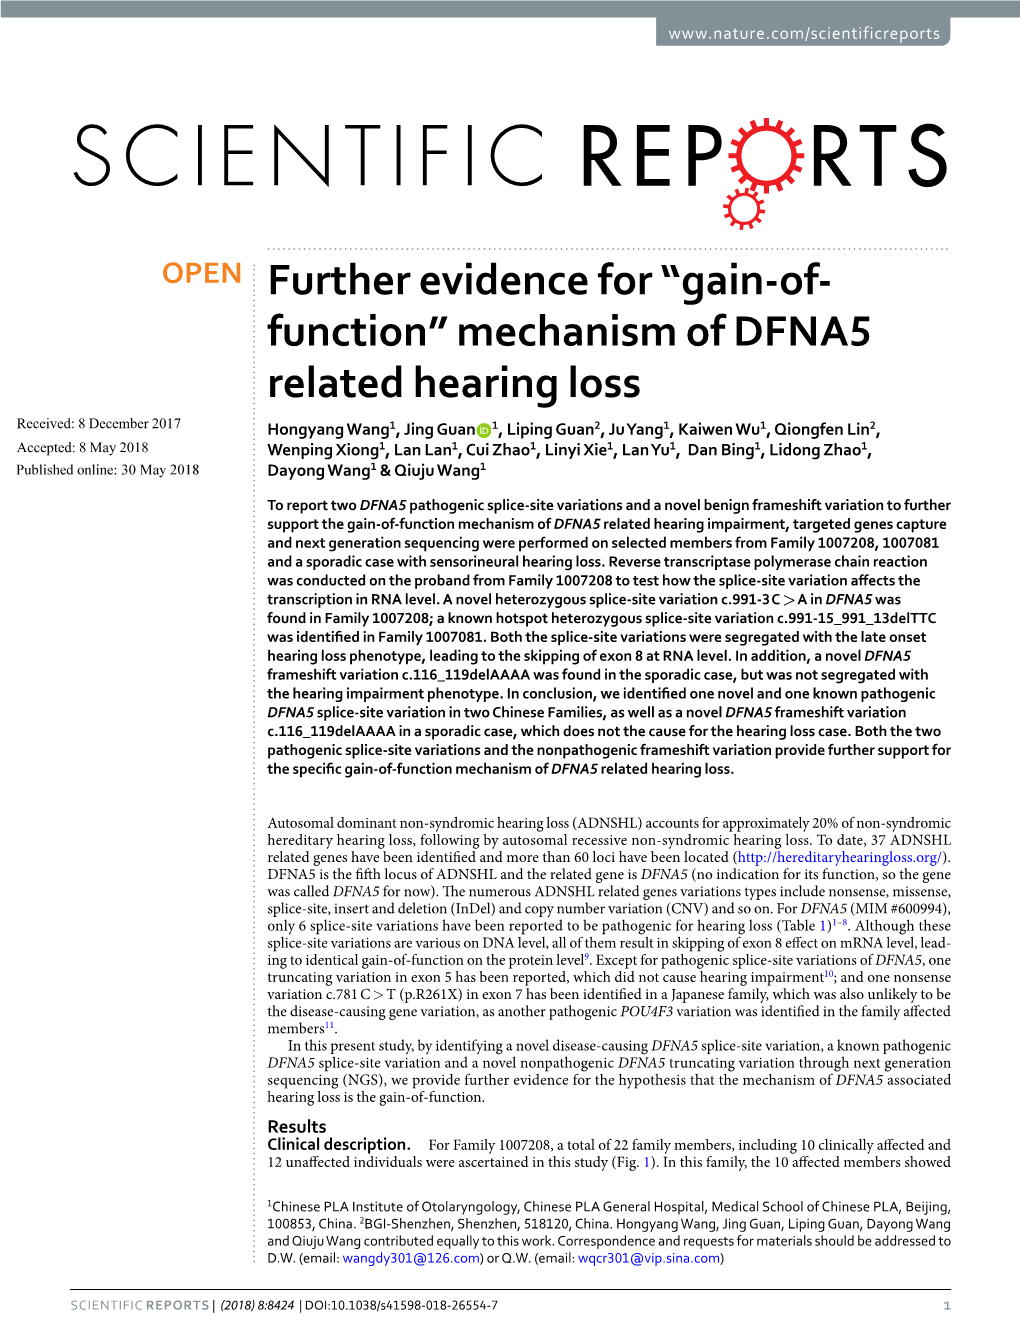 Mechanism of DFNA5 Related Hearing Loss